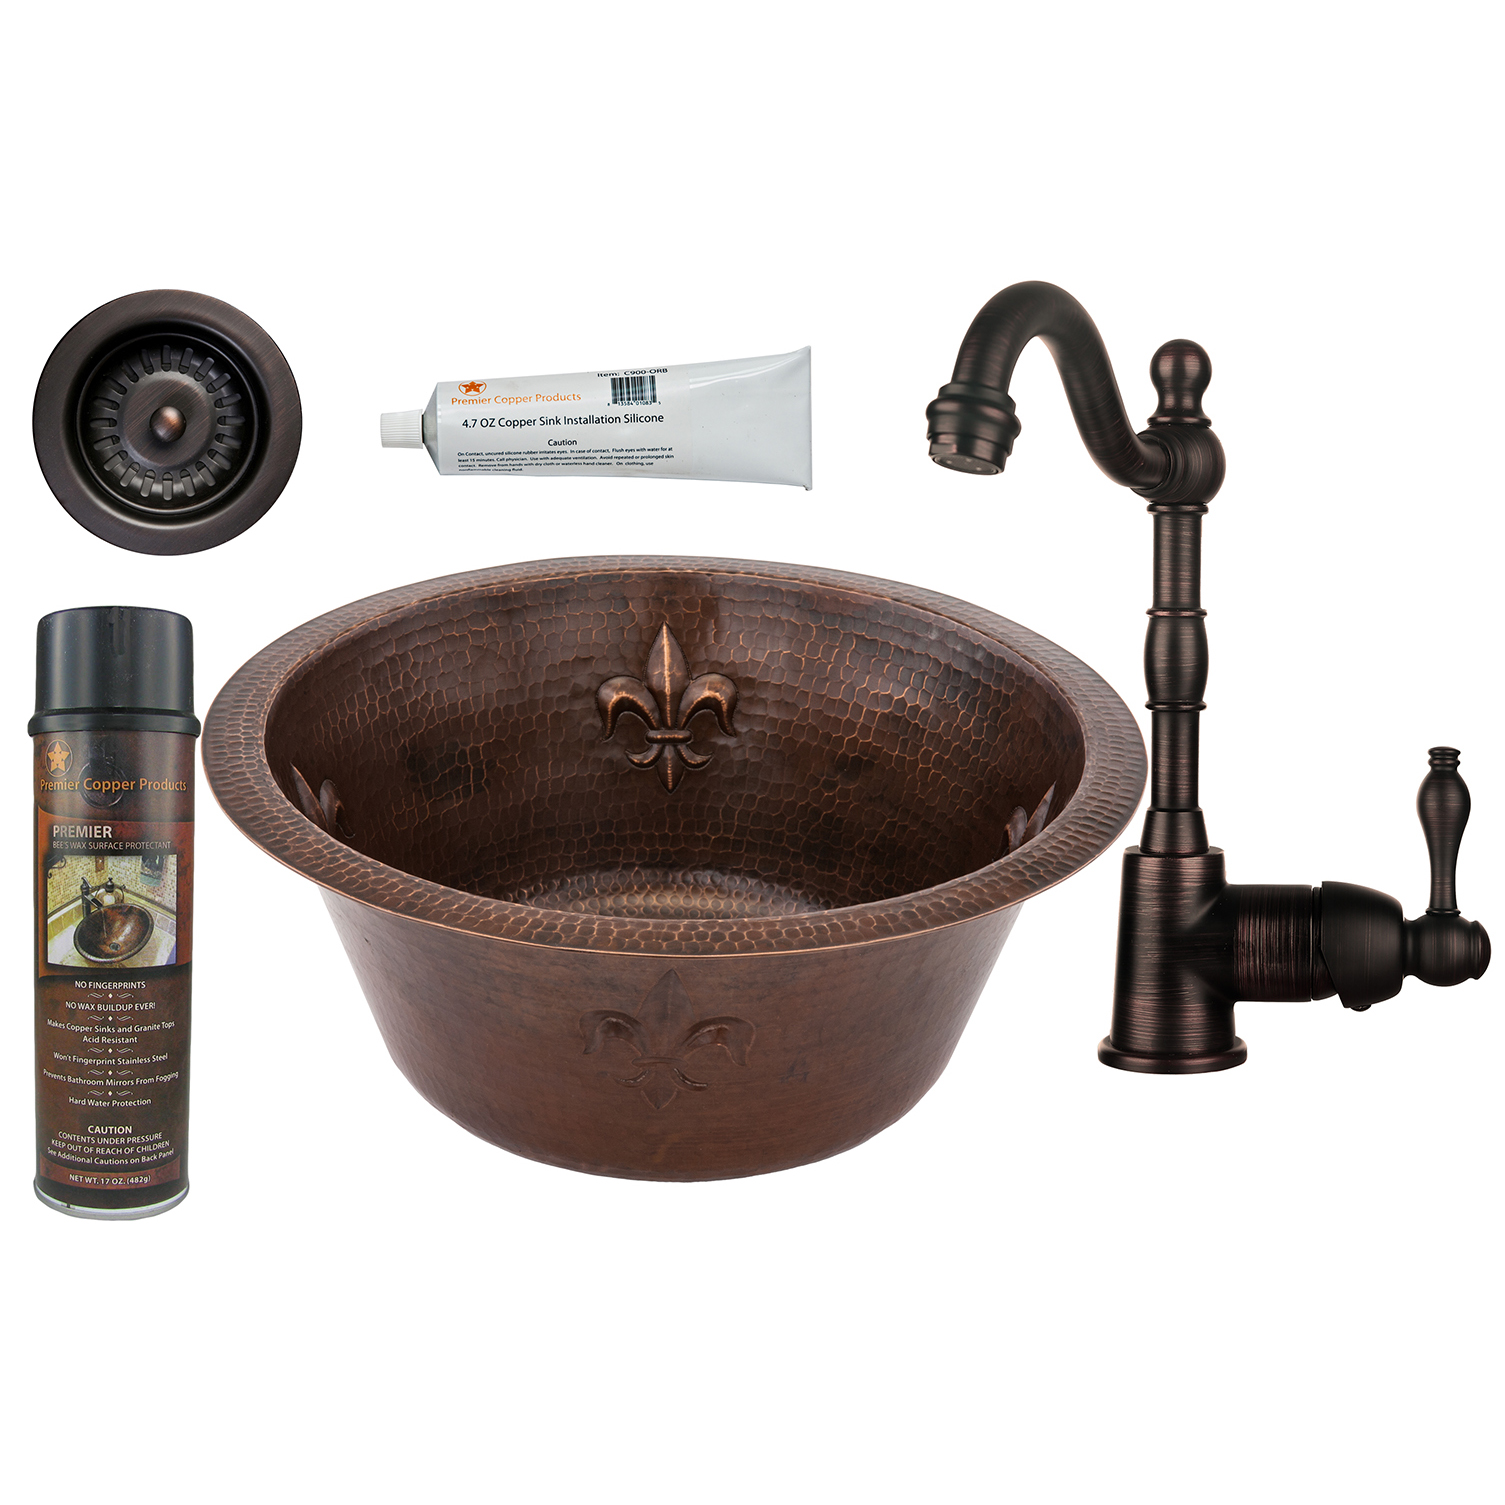 16 Inch Round Copper Fleur De Lis Prep Sink With 3.5 Inch Drain Size, Faucet And Accessories Package, Oil Rubbed Bronze